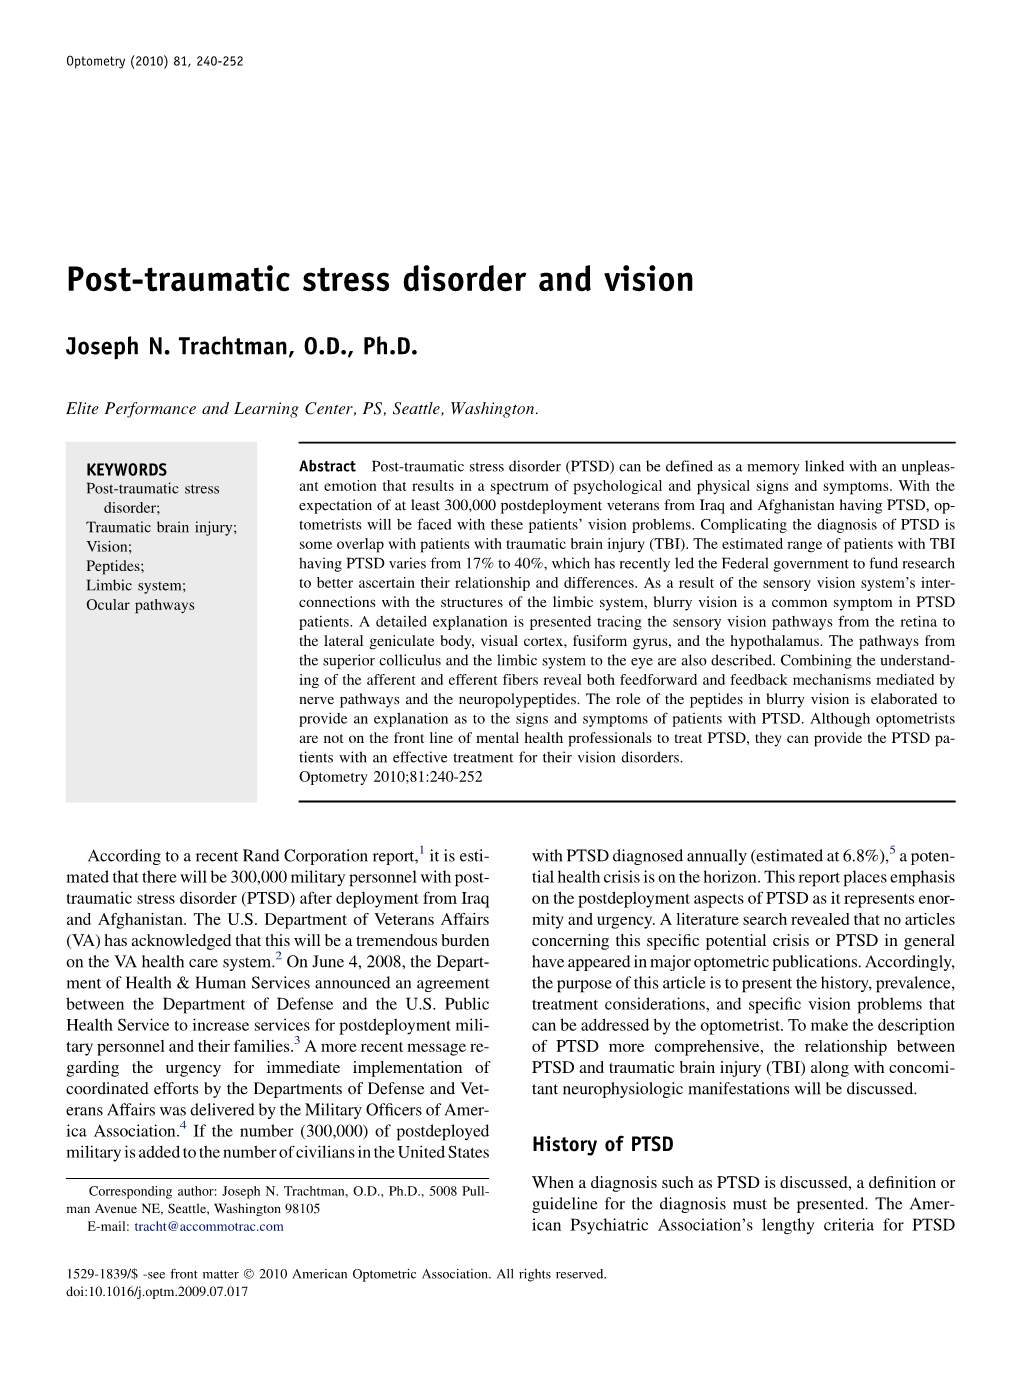 Post-Traumatic Stress Disorder and Vision